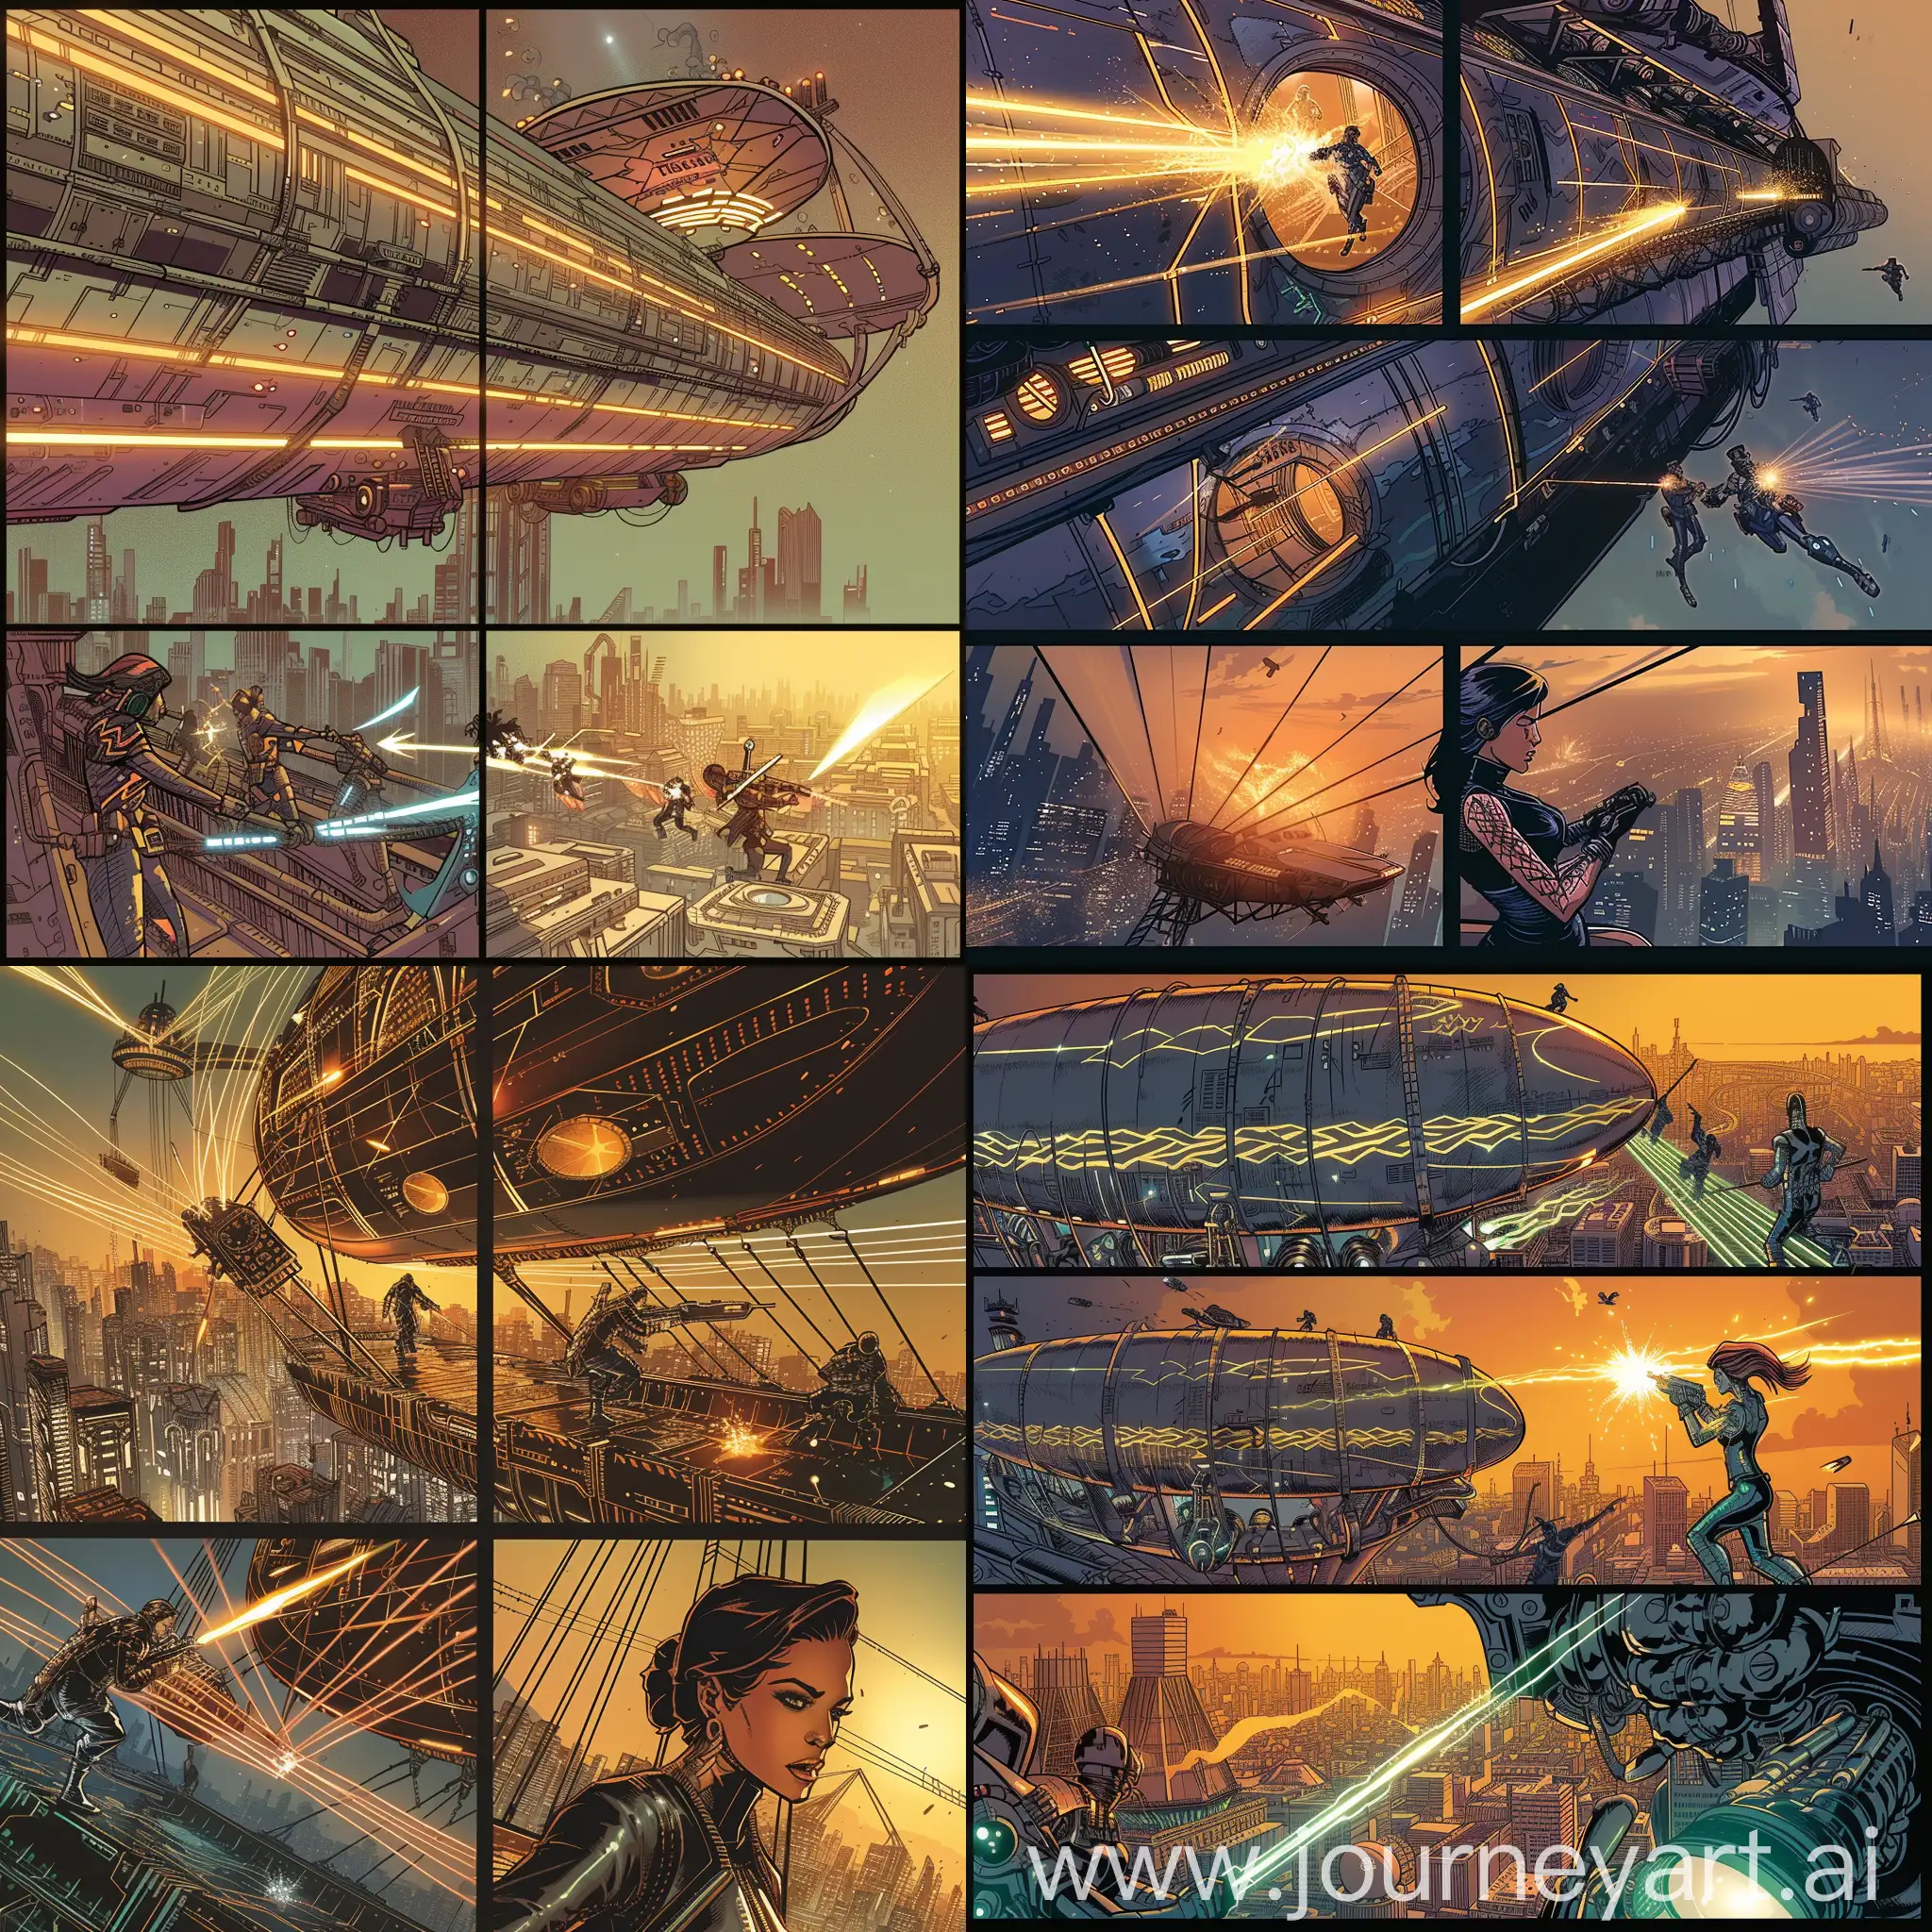 Set against the backdrop of a giant airship soaring above a futuristic cityscape, this four-panel raypunk comic scene captures a high-stakes battle between a band of rebels and the tyrannical ruler's elite guards. The setting combines sleek, art deco-inspired design with advanced technology, providing a visually striking environment for this confrontation.  Panel 1: Boarding the Airship "The rebels, dressed in streamlined, metallic armor with vibrant neon trim, stealthily board the tyrant’s massive airship. The airship is adorned with intricate, glowing patterns and hovers ominously above the city."  Panel 2: Ambush "As the rebels sneak through the narrow, dimly-lit corridors of the airship, they suddenly ambush a group of the tyrant’s guards. The scene is a flurry of motion, with rays of light from laser weapons casting sharp shadows on the polished metal walls."  Panel 3: The Showdown "The lead rebel, a charismatic woman with a bright, energy sword, confronts the captain of the guards in the engine room, where pulsating engines cast eerie lights on their intense duel. Sparks fly as their weapons clash, illuminating their determined faces."  Panel 4: Victory and Escape "After overpowering the guards, the rebels rush to the control room. One of them uses a sophisticated hacking device to take control of the airship. The final panel shows the airship turning away from the city, as the rebels escape with critical information, the city skyline receding in the background, bathed in the light of a setting sun."